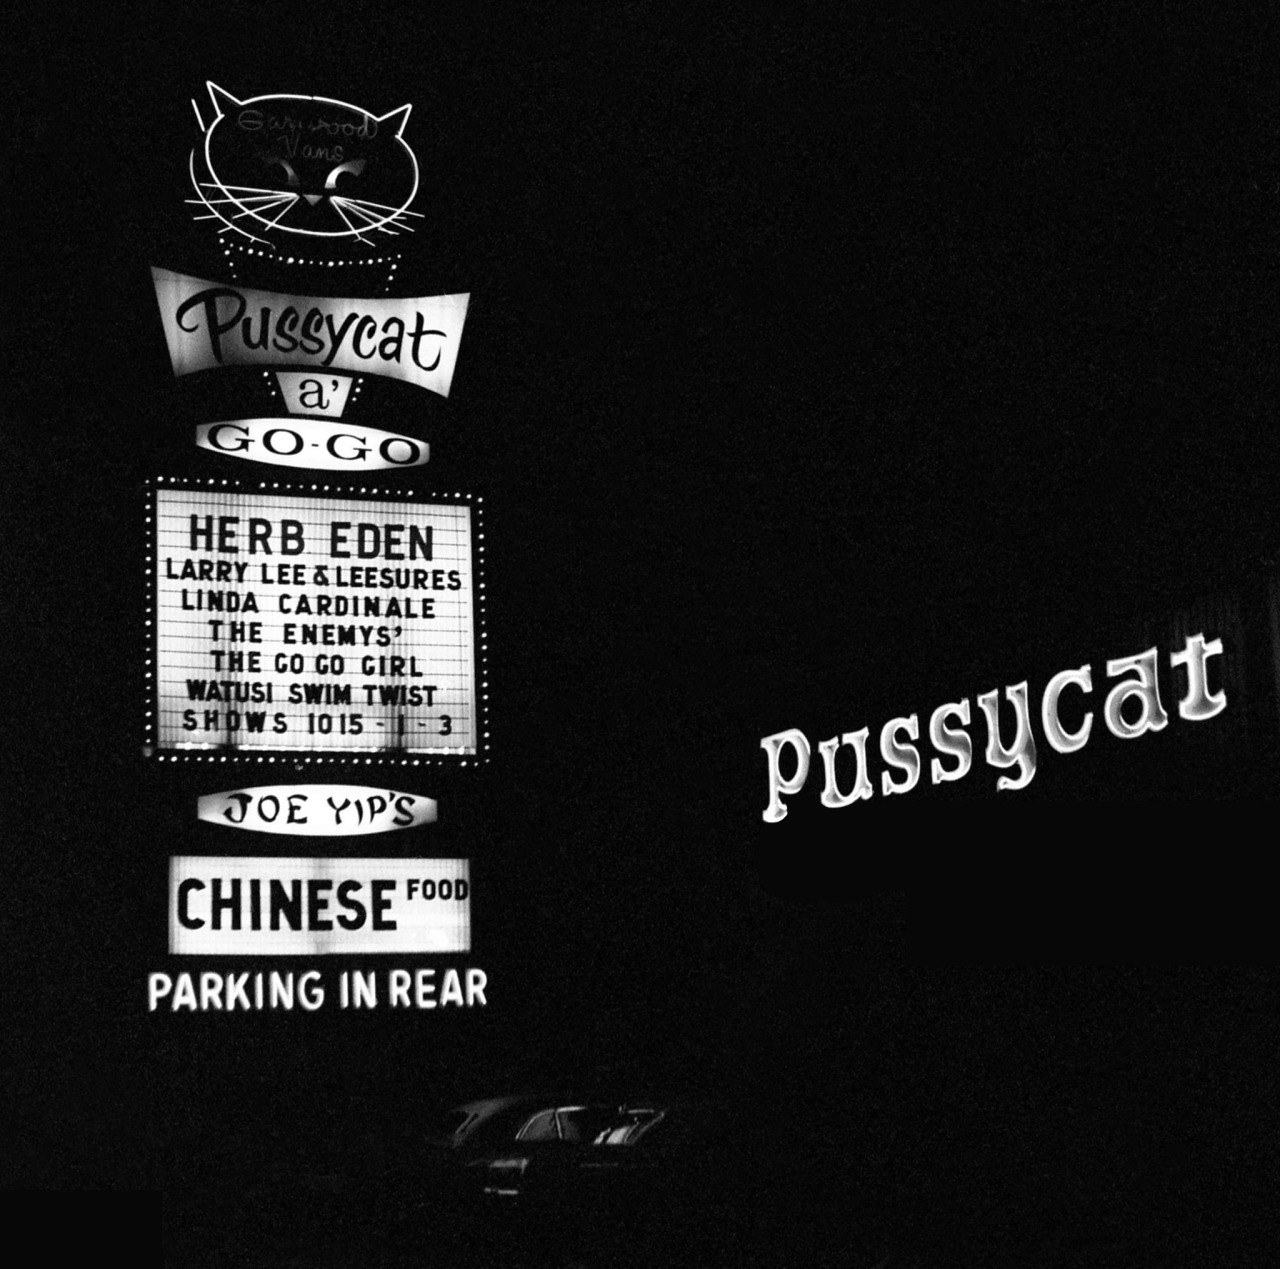 Pussycat a’ Go-Go, Las Vegas Strip, December 26, 1965
Garwood Van and Joe Yip leased Al Mengarelli’s Rendezvous Club and turned it into Pussycat in ‘64, with a neon outlined cat head attached to the top of the Rendezvous’ sign. Rosol Collection,...